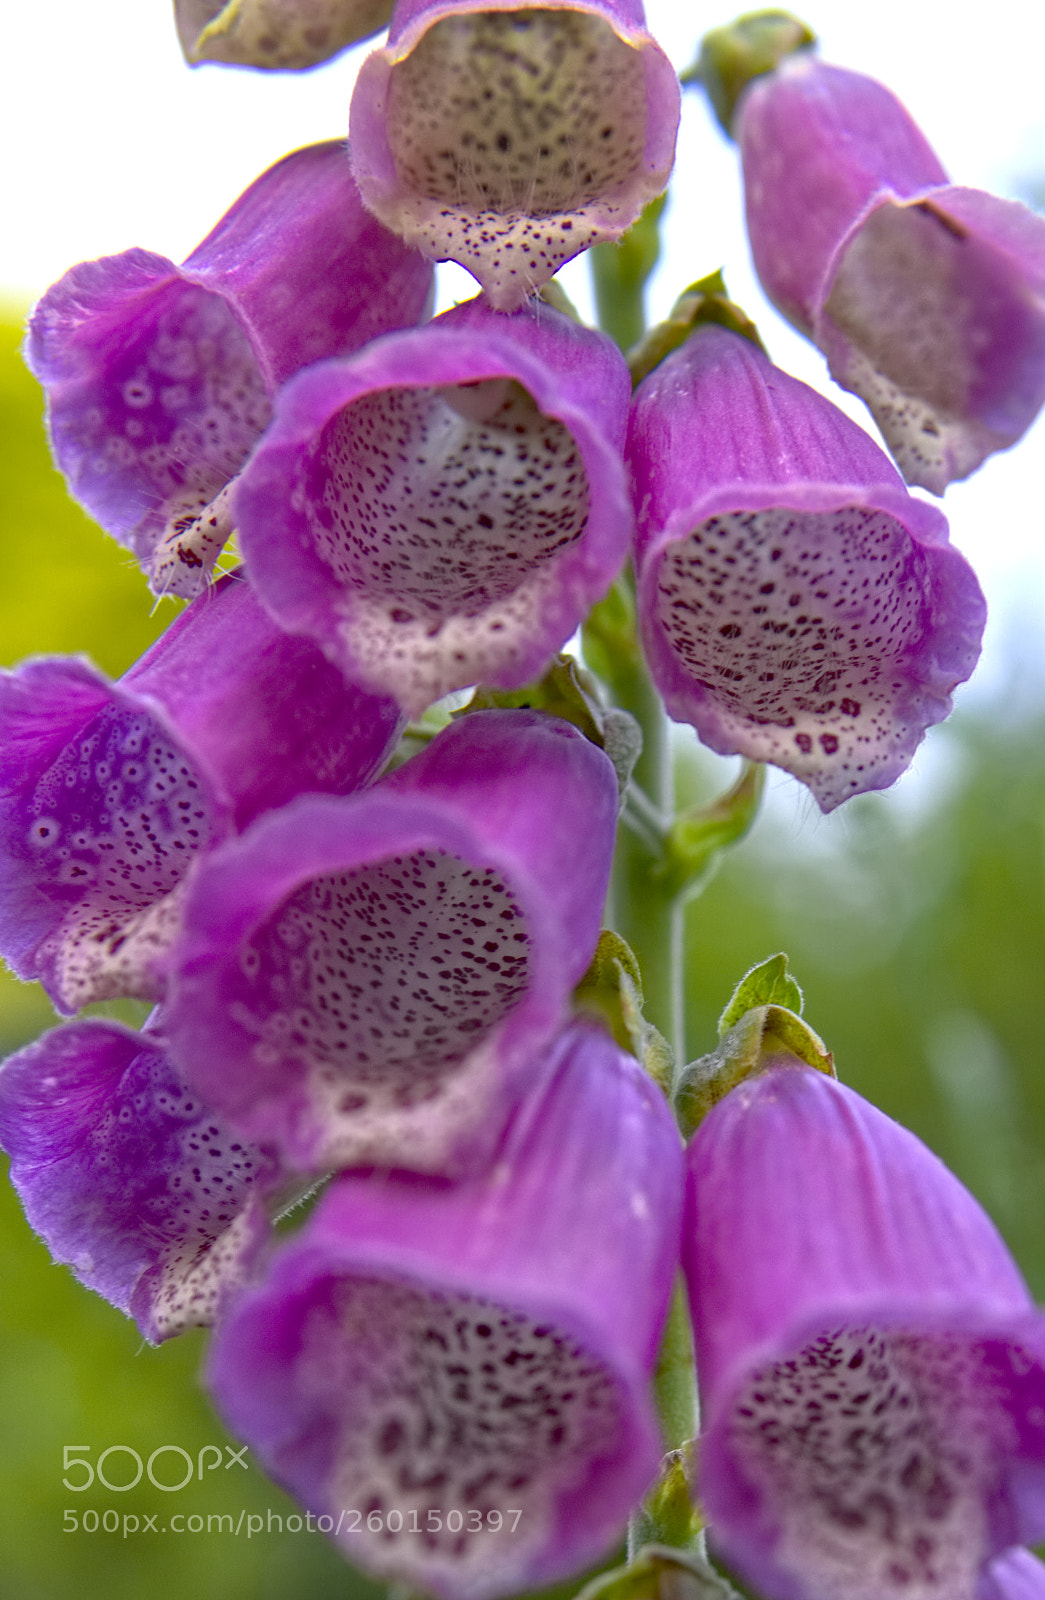 Sony a6000 sample photo. Red foxglove photography